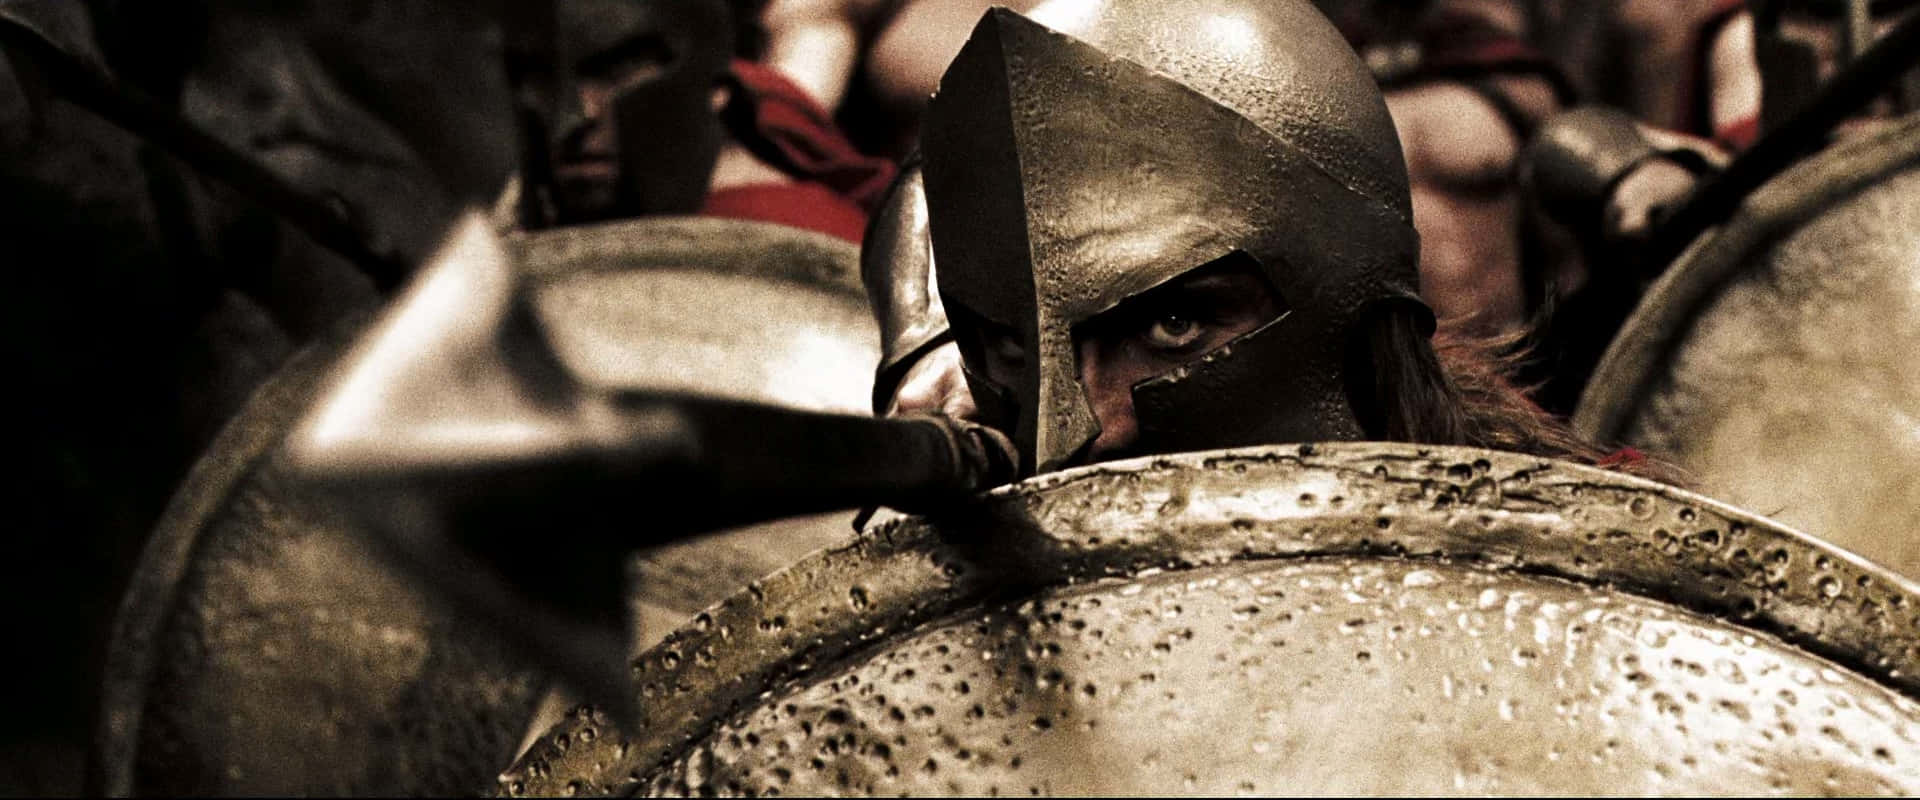 A Warrior With Helmet From The 300 Movie Wallpaper